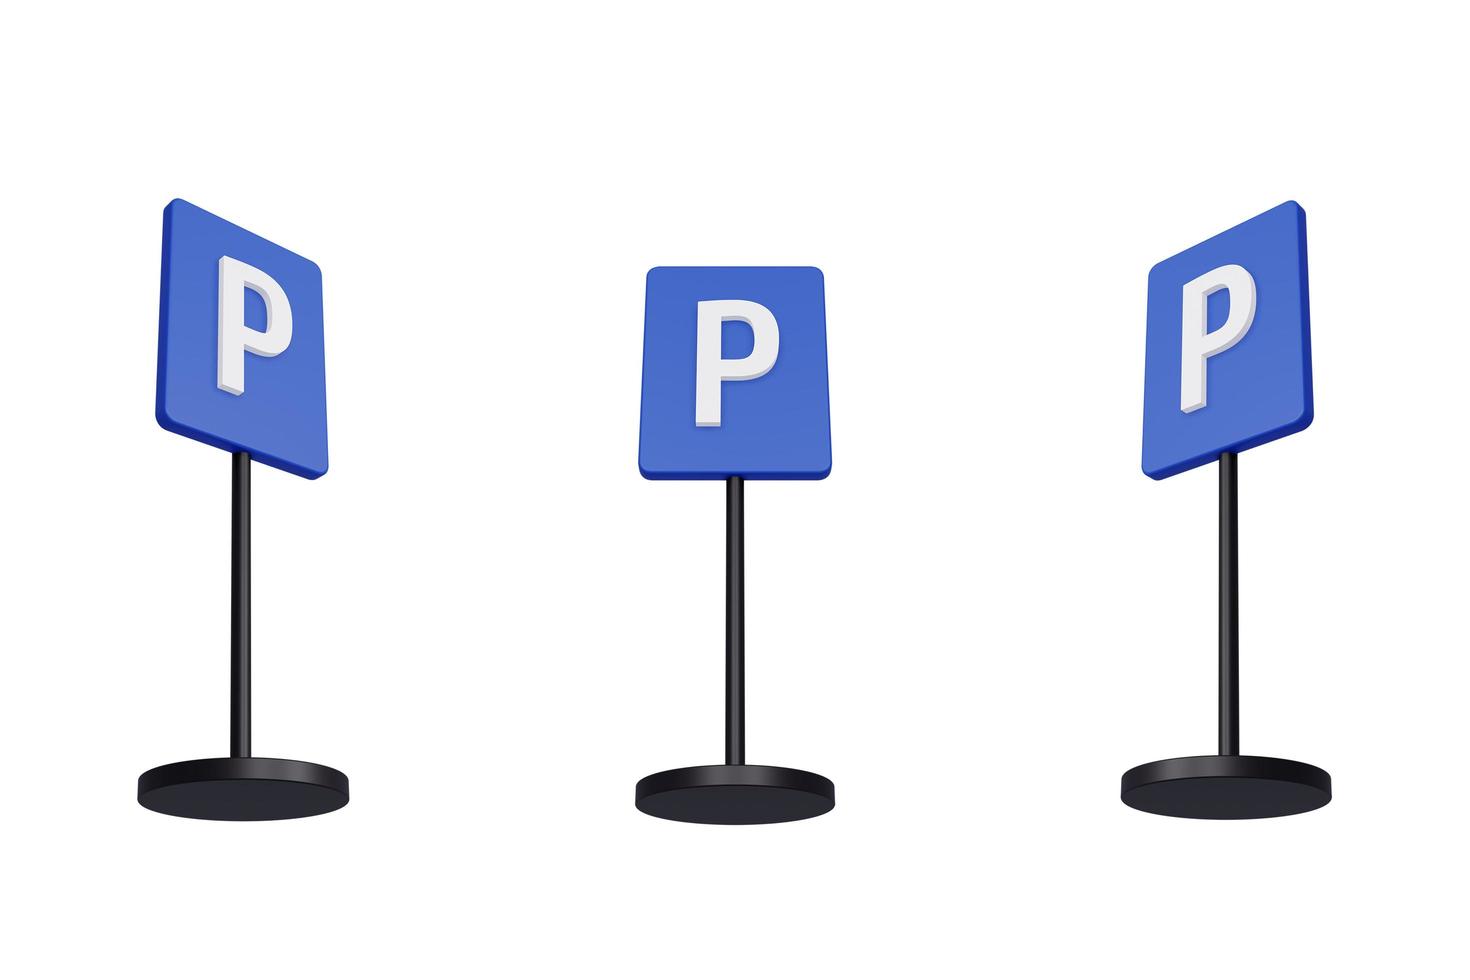 3d render illustration traffic signs of Parking zone photo